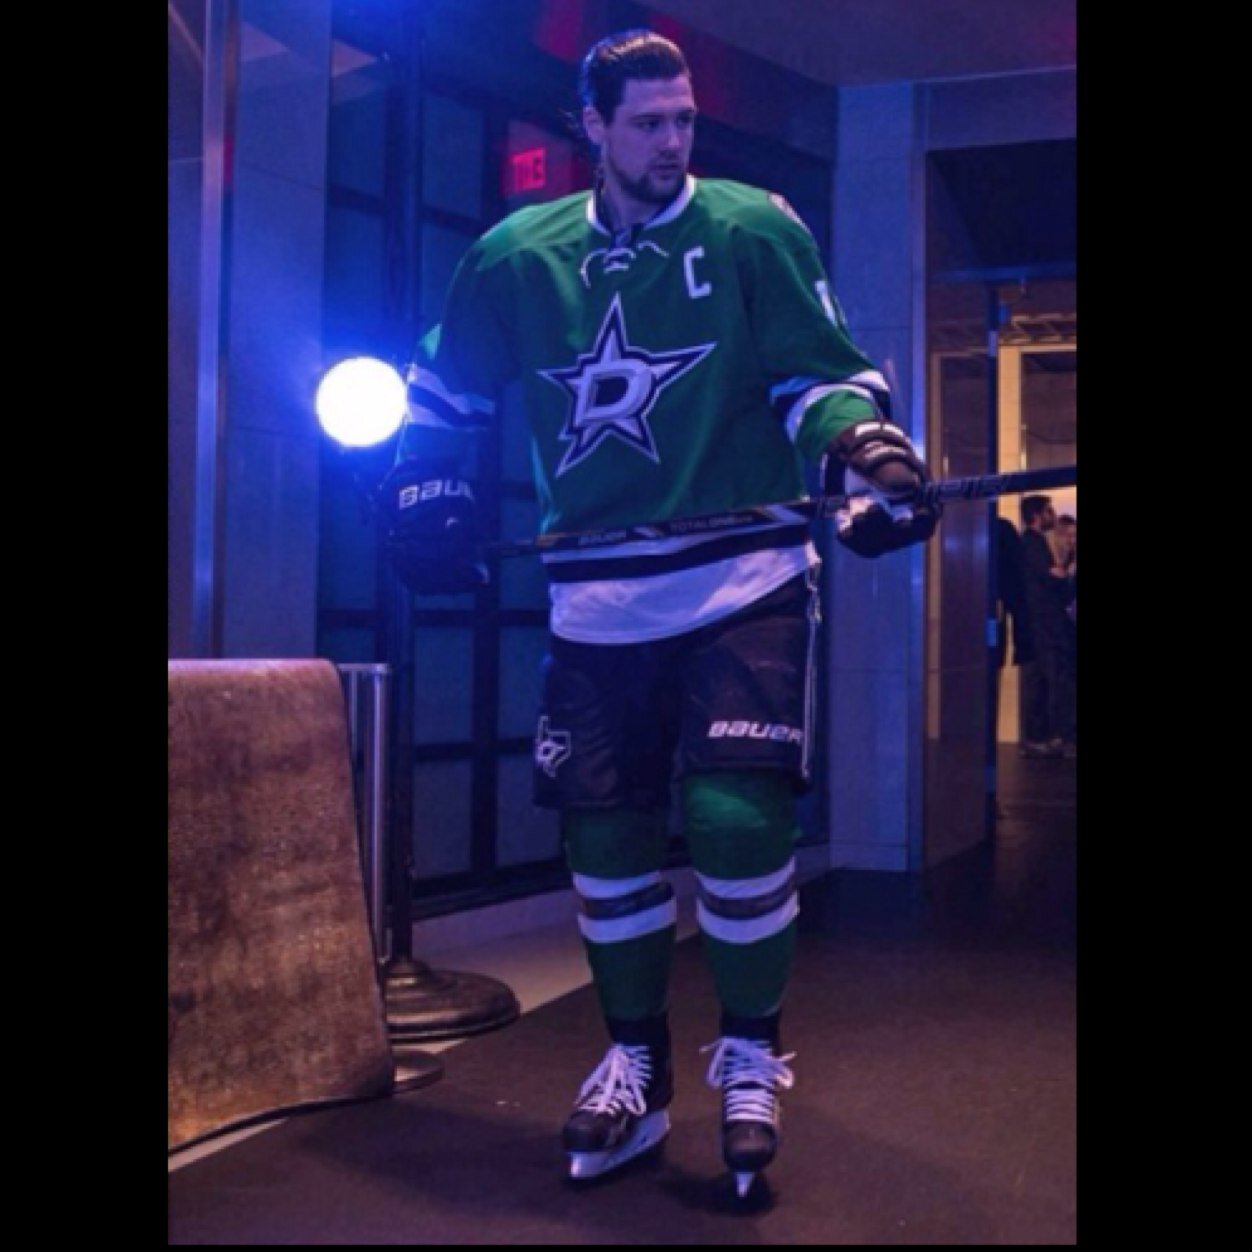 The Official twitter account for Jamie Benn. Number 14 for the Dallas Stars.